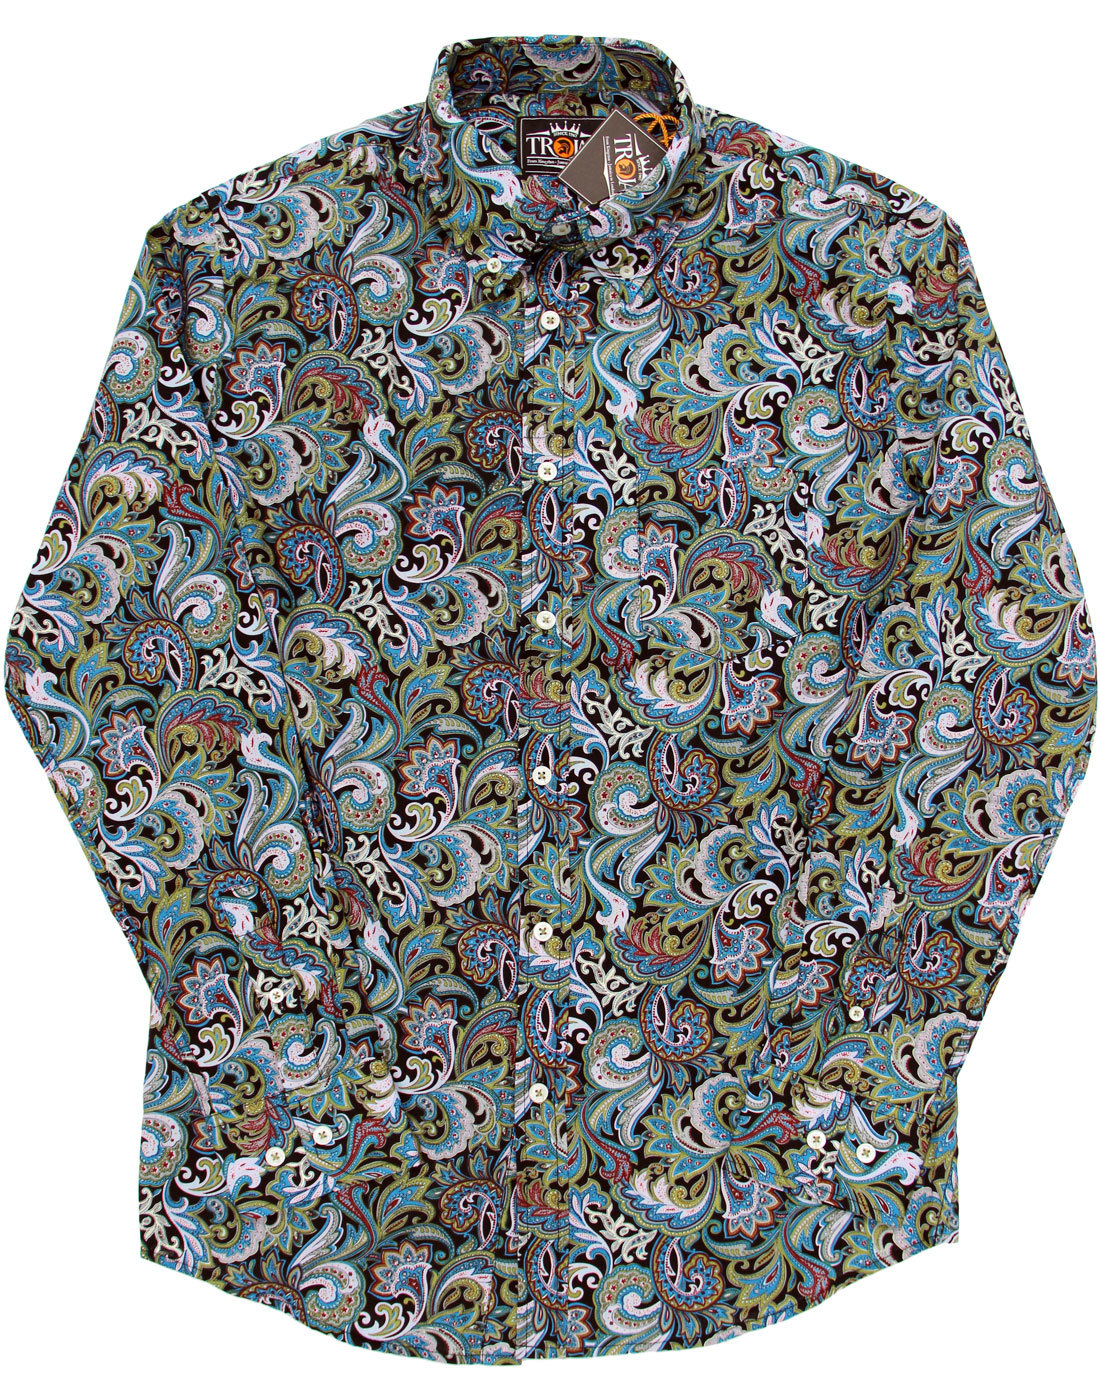 TROJAN RECORDS 60s Mod Psychedelic Floral Paisley Shirt in Black